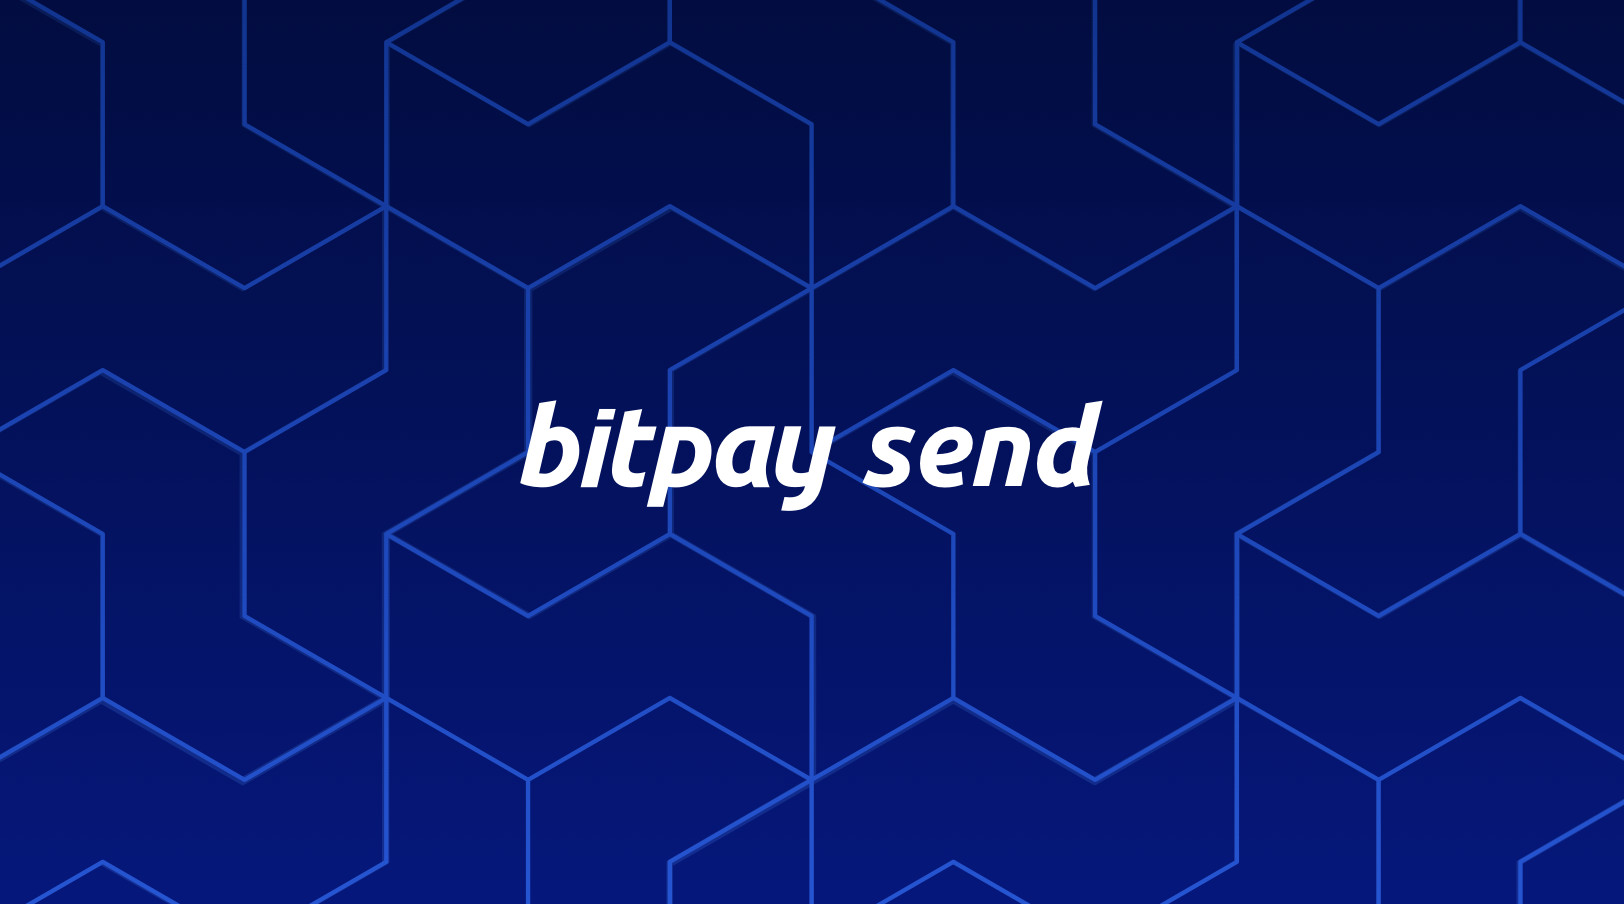 BitPay Enables Businesses to Pay Out with Crypto Using BitPay Send